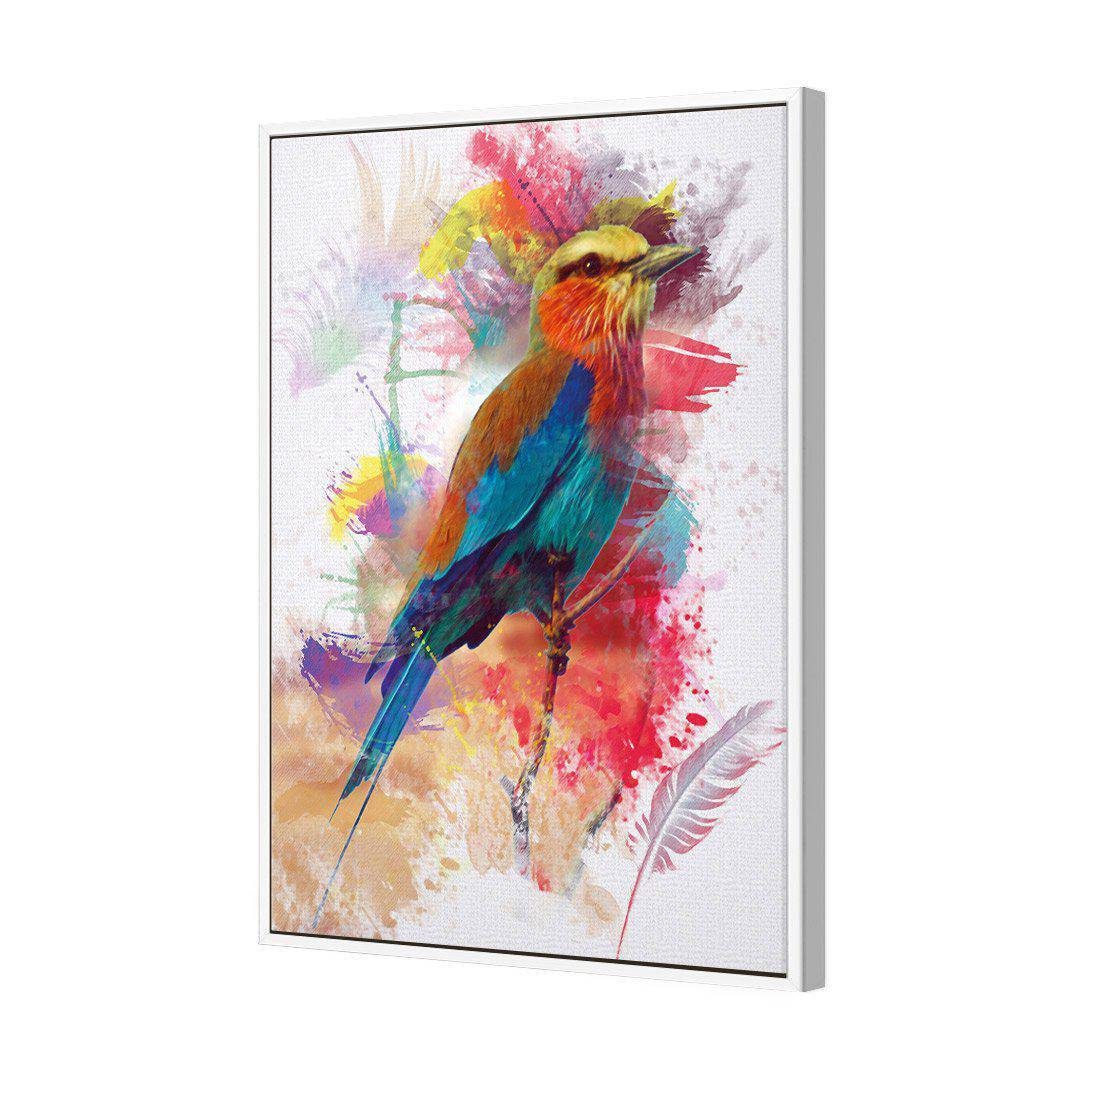 Painted Bird And Feathers Canvas Art-Canvas-Wall Art Designs-45x30cm-Canvas - White Frame-Wall Art Designs